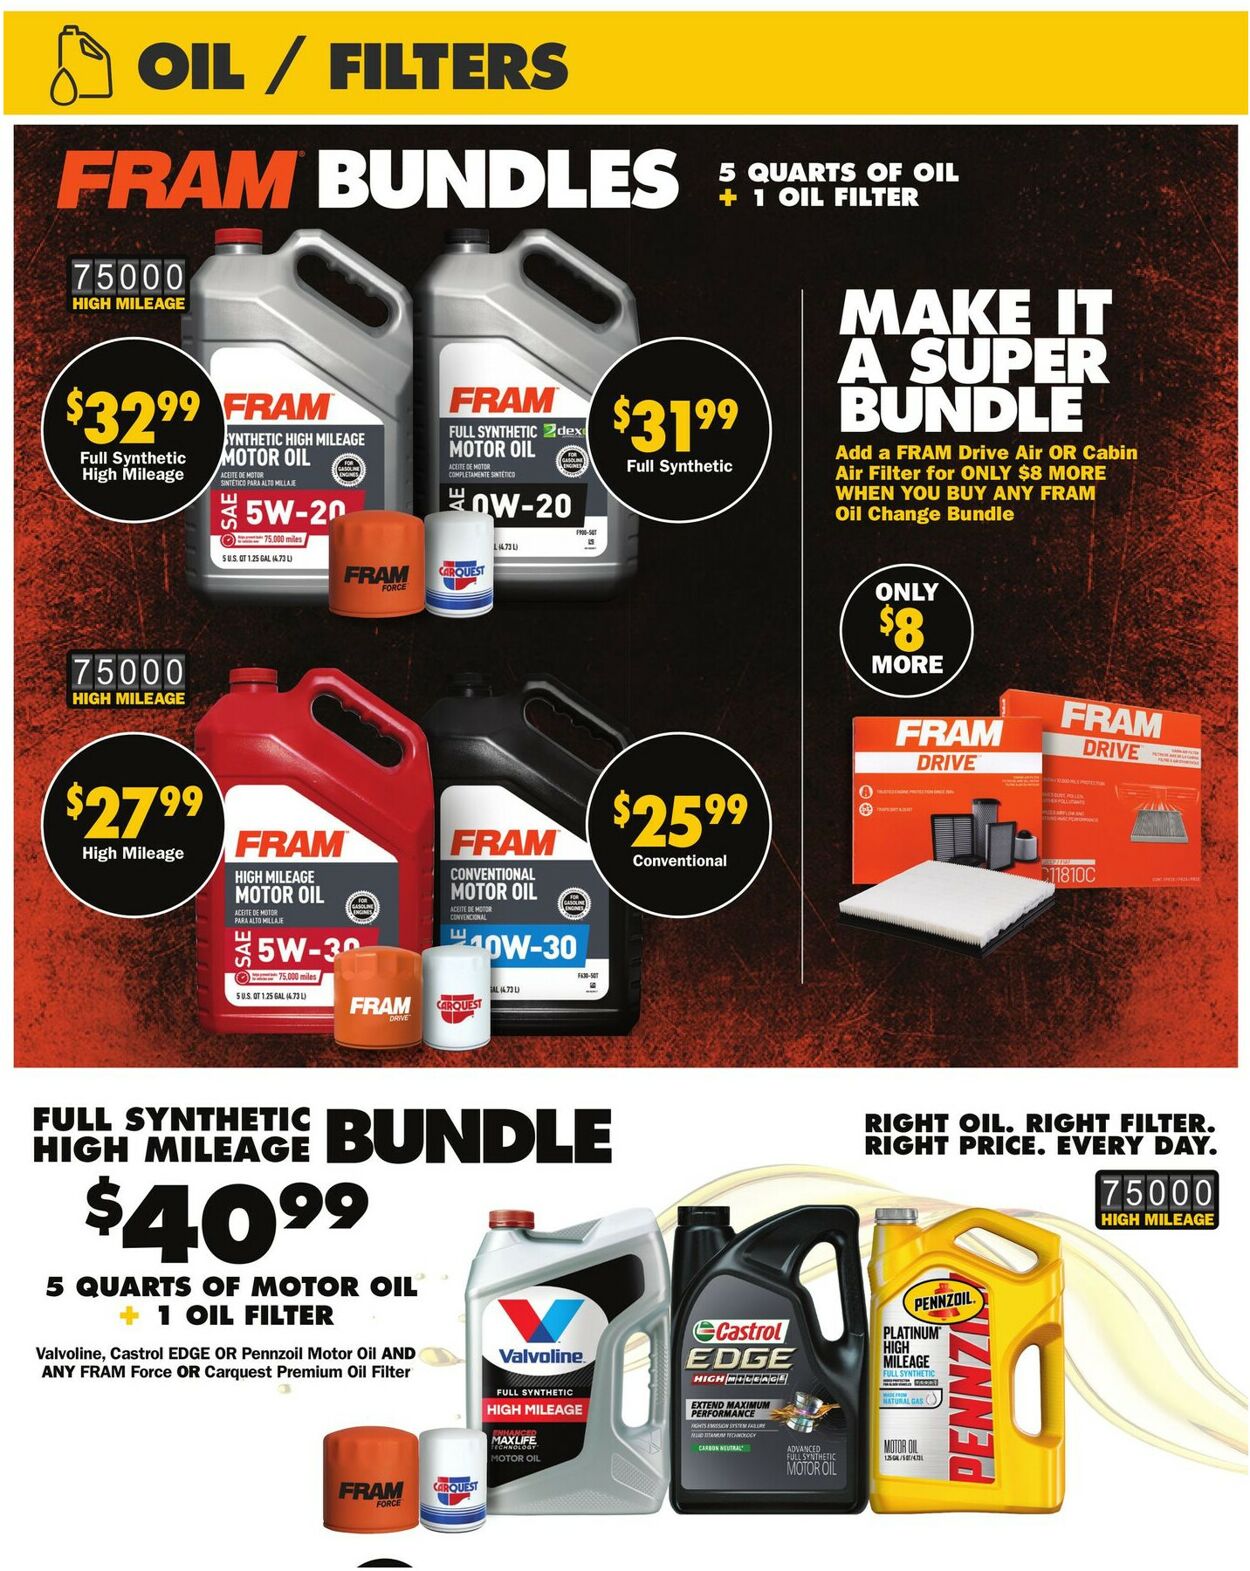 Advance Auto Parts Ad from 02/02/2023